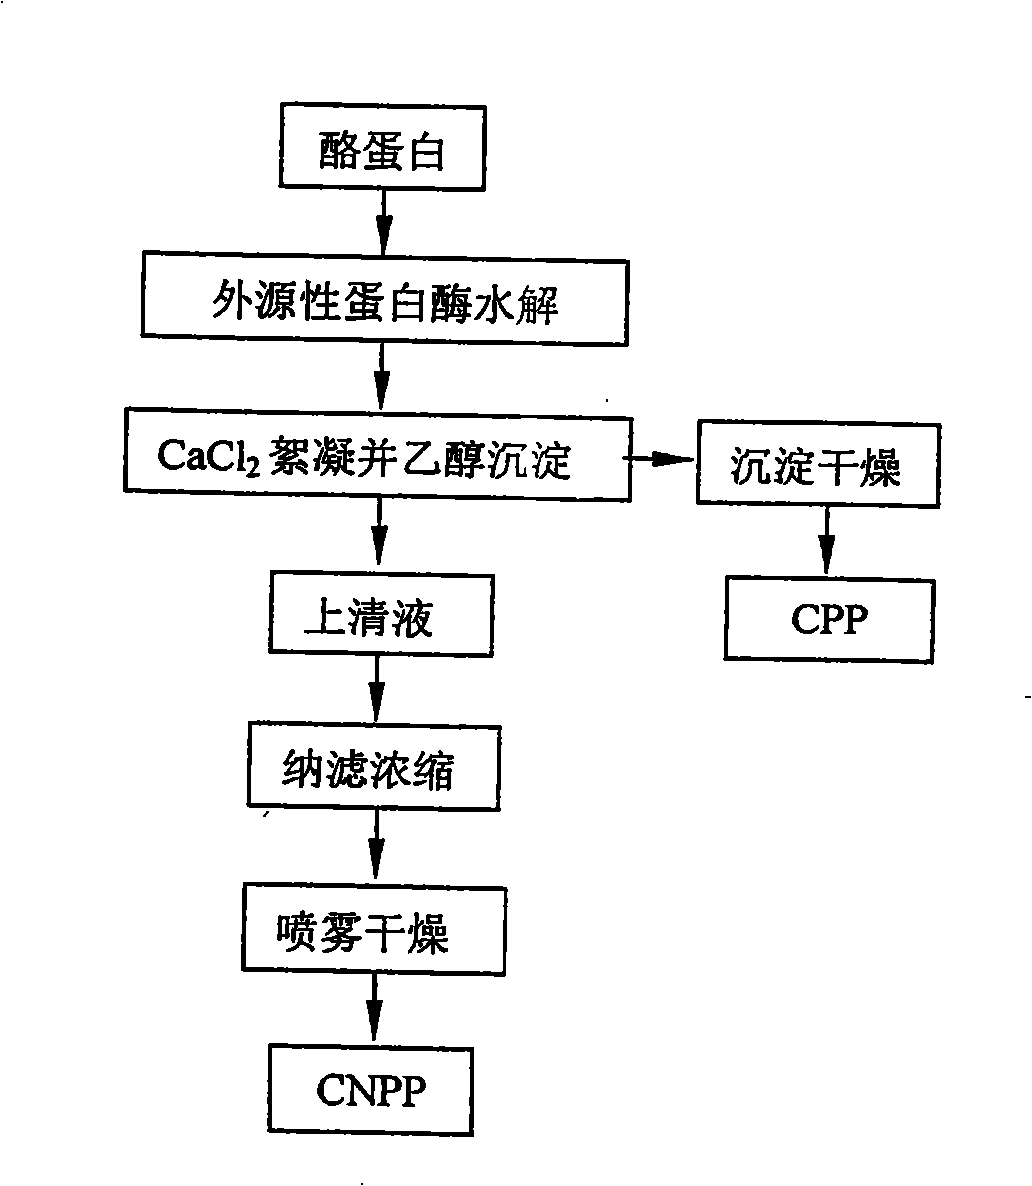 Process for preparing phosphopeptide non-phosphopeptide by hydrolyzing protein through enzyme